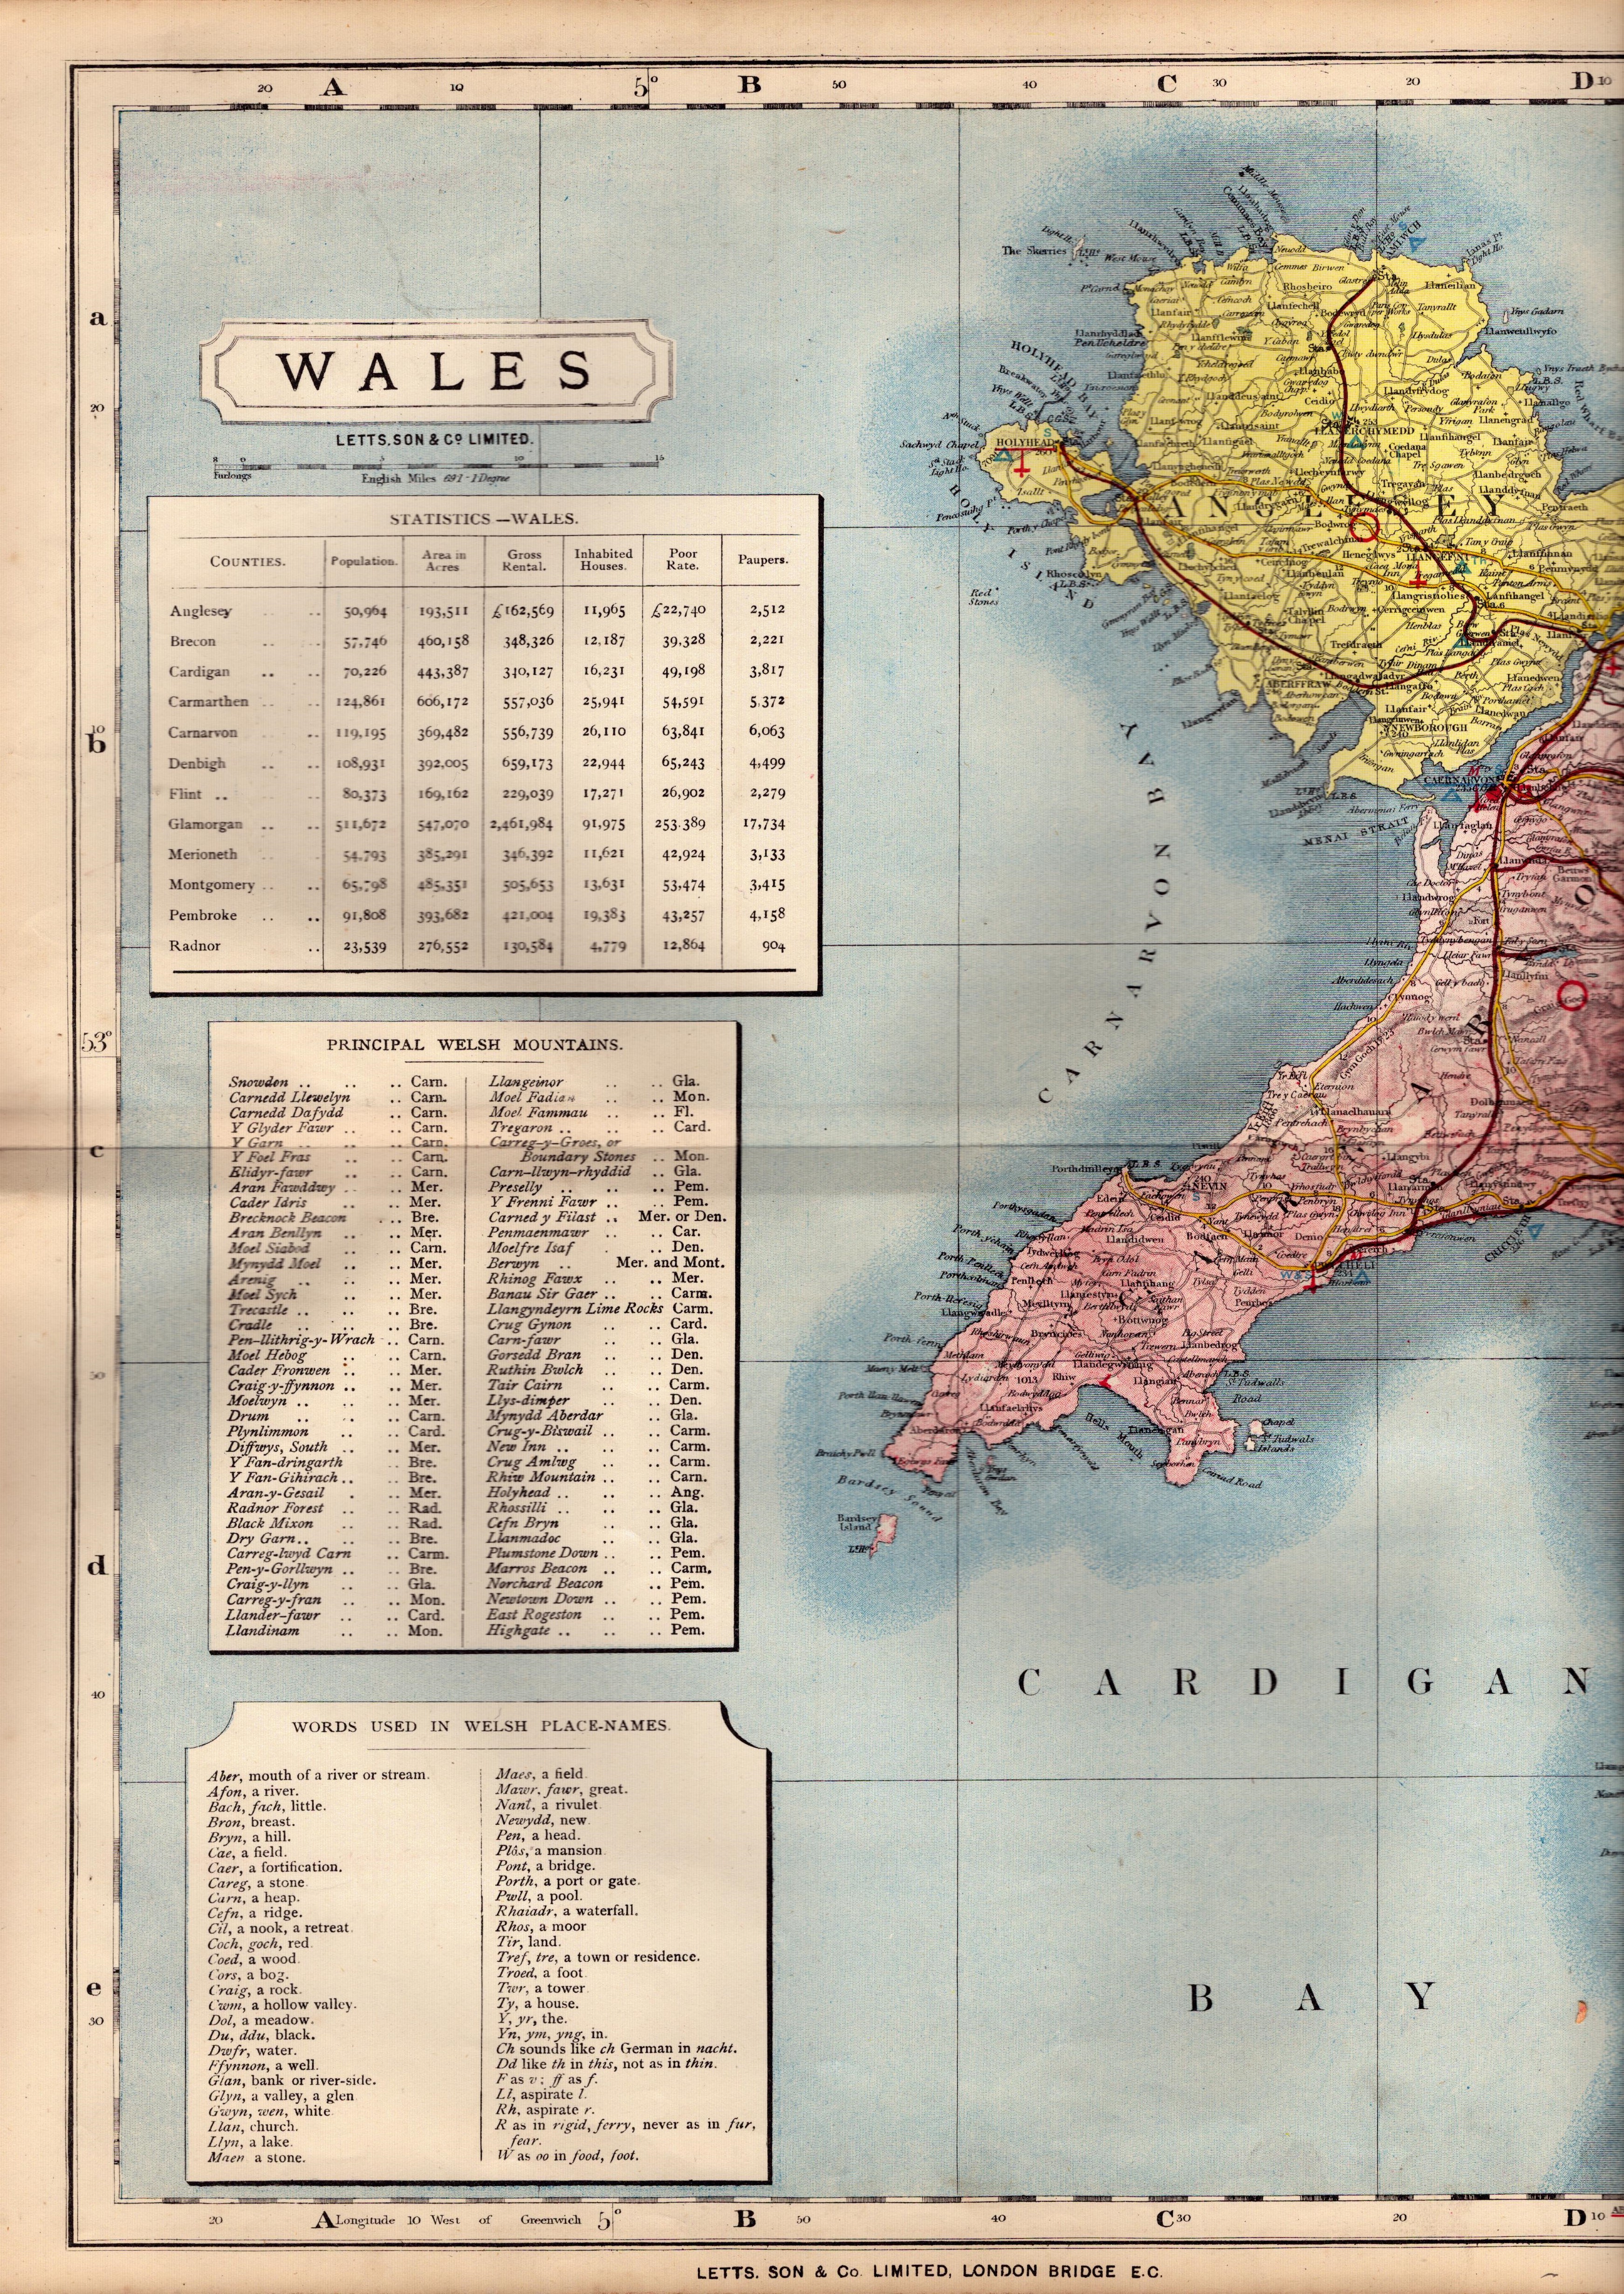 North Wales Large Victorian Letts 1884 Antique Coloured Map.